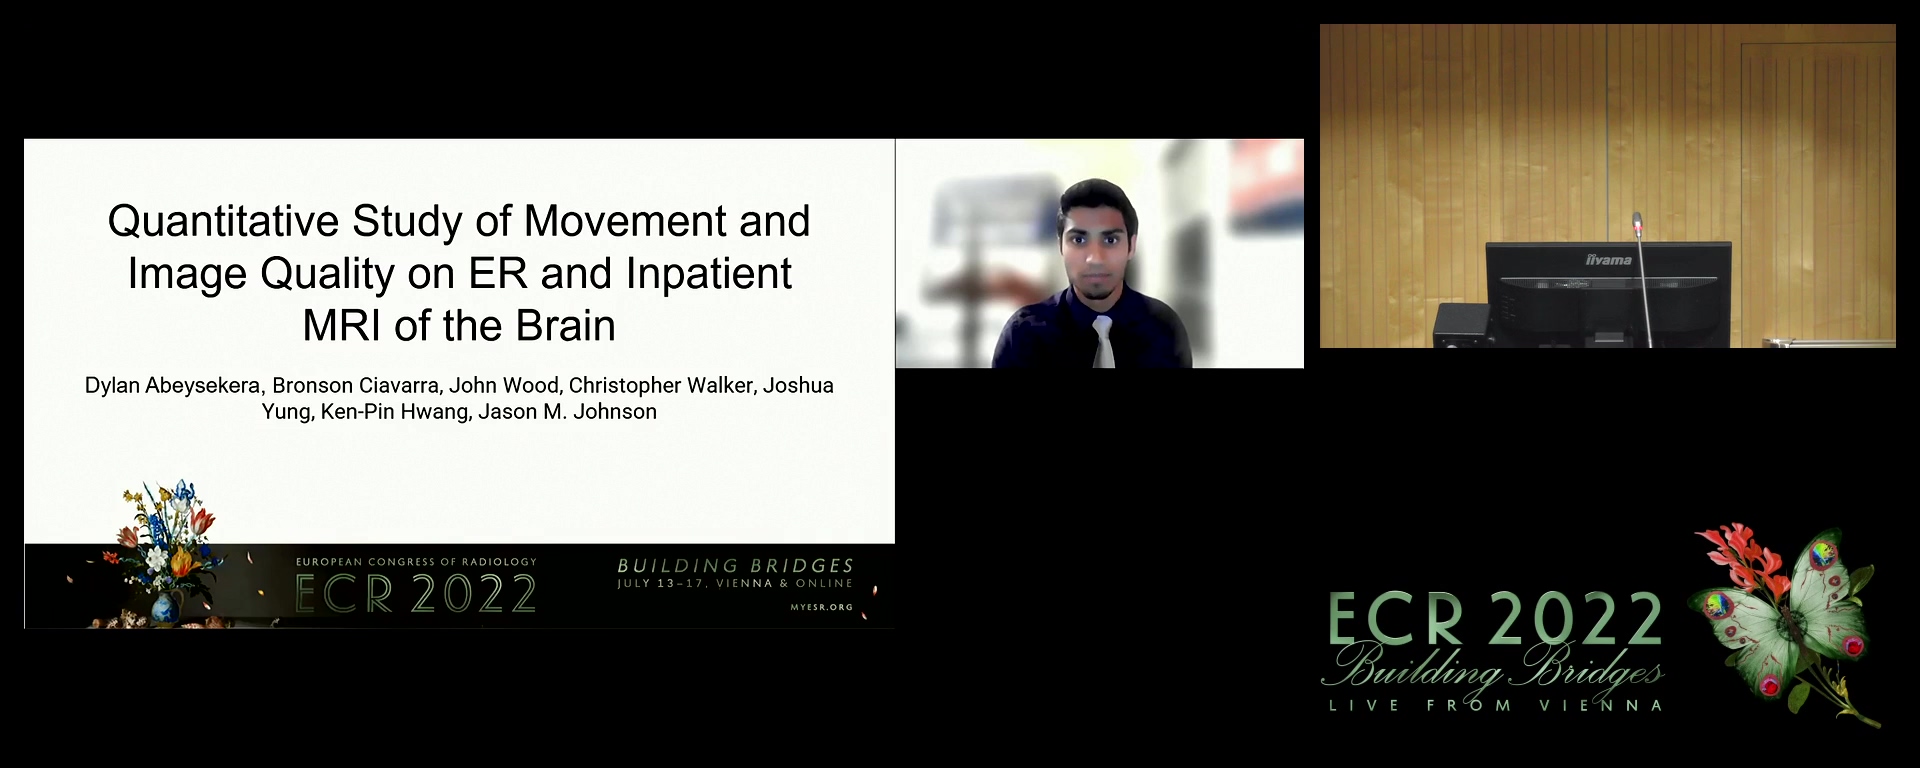 Quantitative study of movement and image quality on ER and inpatient MRI of the brain - Dylan Abeysekera, Houston / US